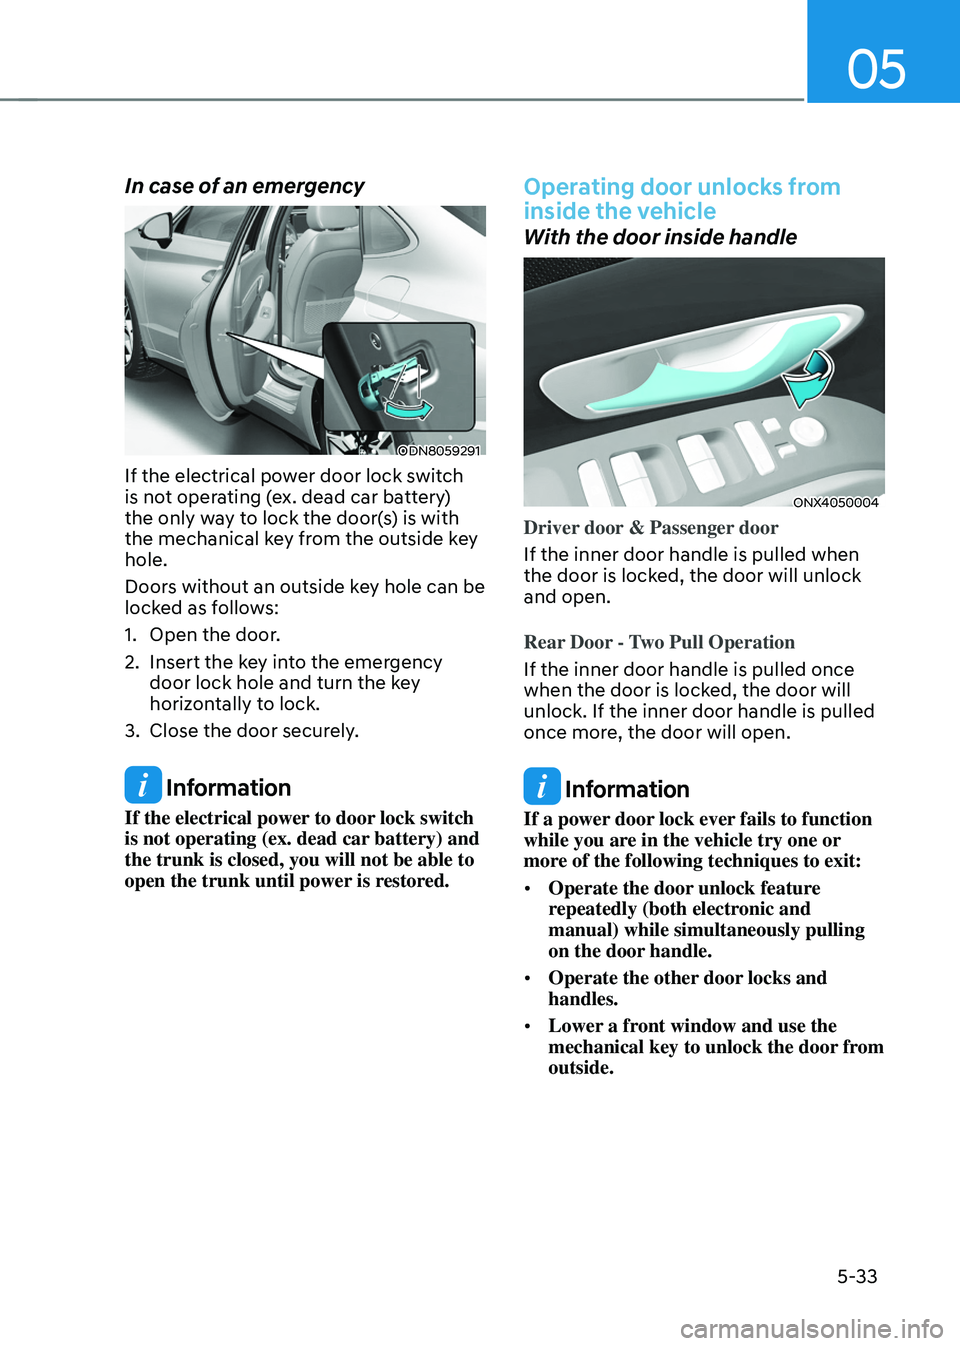 HYUNDAI TUCSON 2022  Owners Manual 05
5-33
In case of an emergency 
ODN8059291
If the electrical power door lock switch 
is not operating (ex. dead car battery) 
the only way to lock the door(s) is with 
the mechanical key from the out